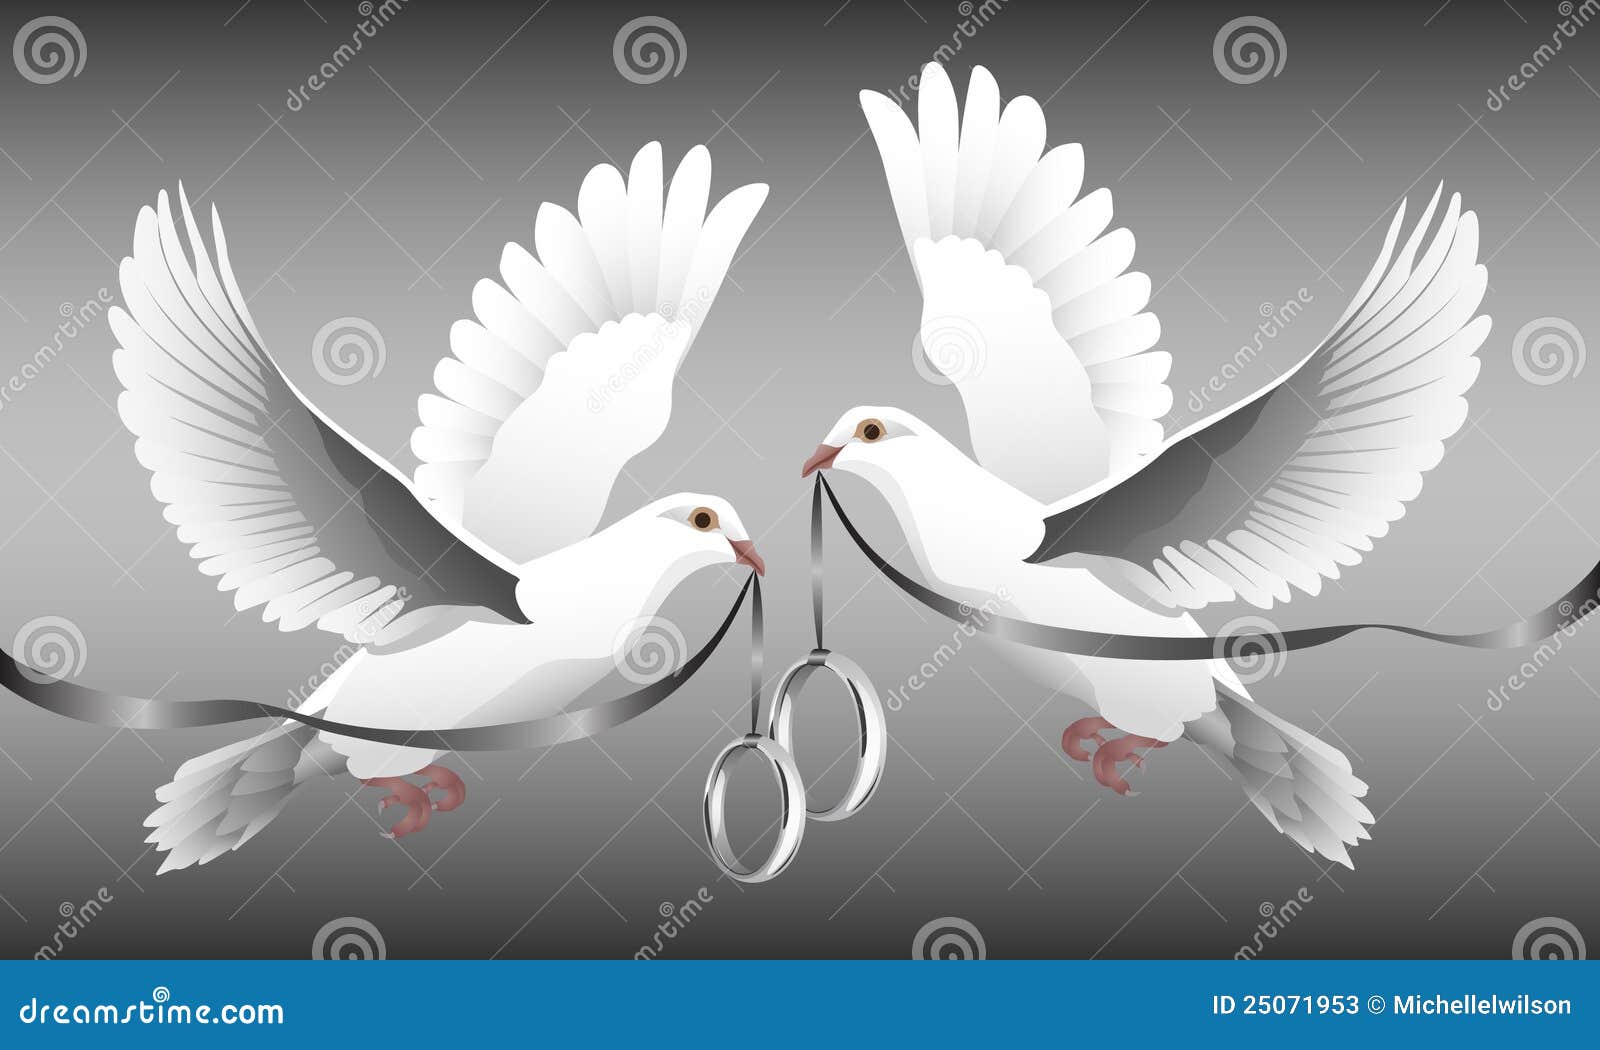 clipart wedding rings and doves - photo #33